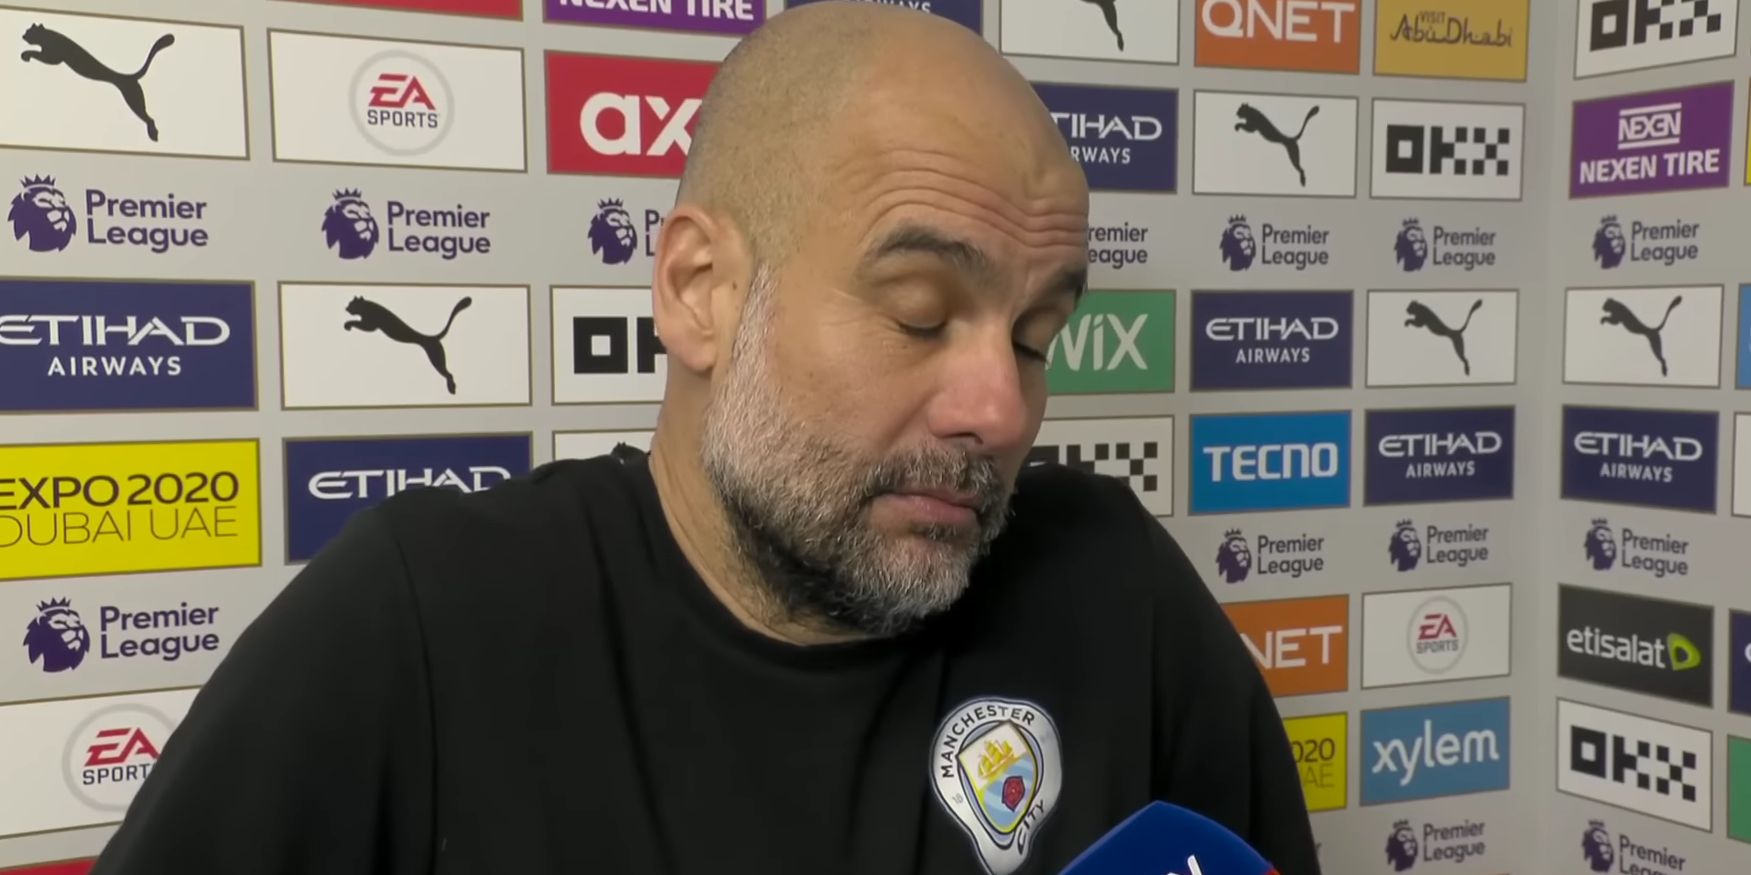 (Video) Pep Guardiola admits he ‘imitates’ Jurgen Klopp and sets up the Wembley meeting with: ‘I’m going to try and beat him’